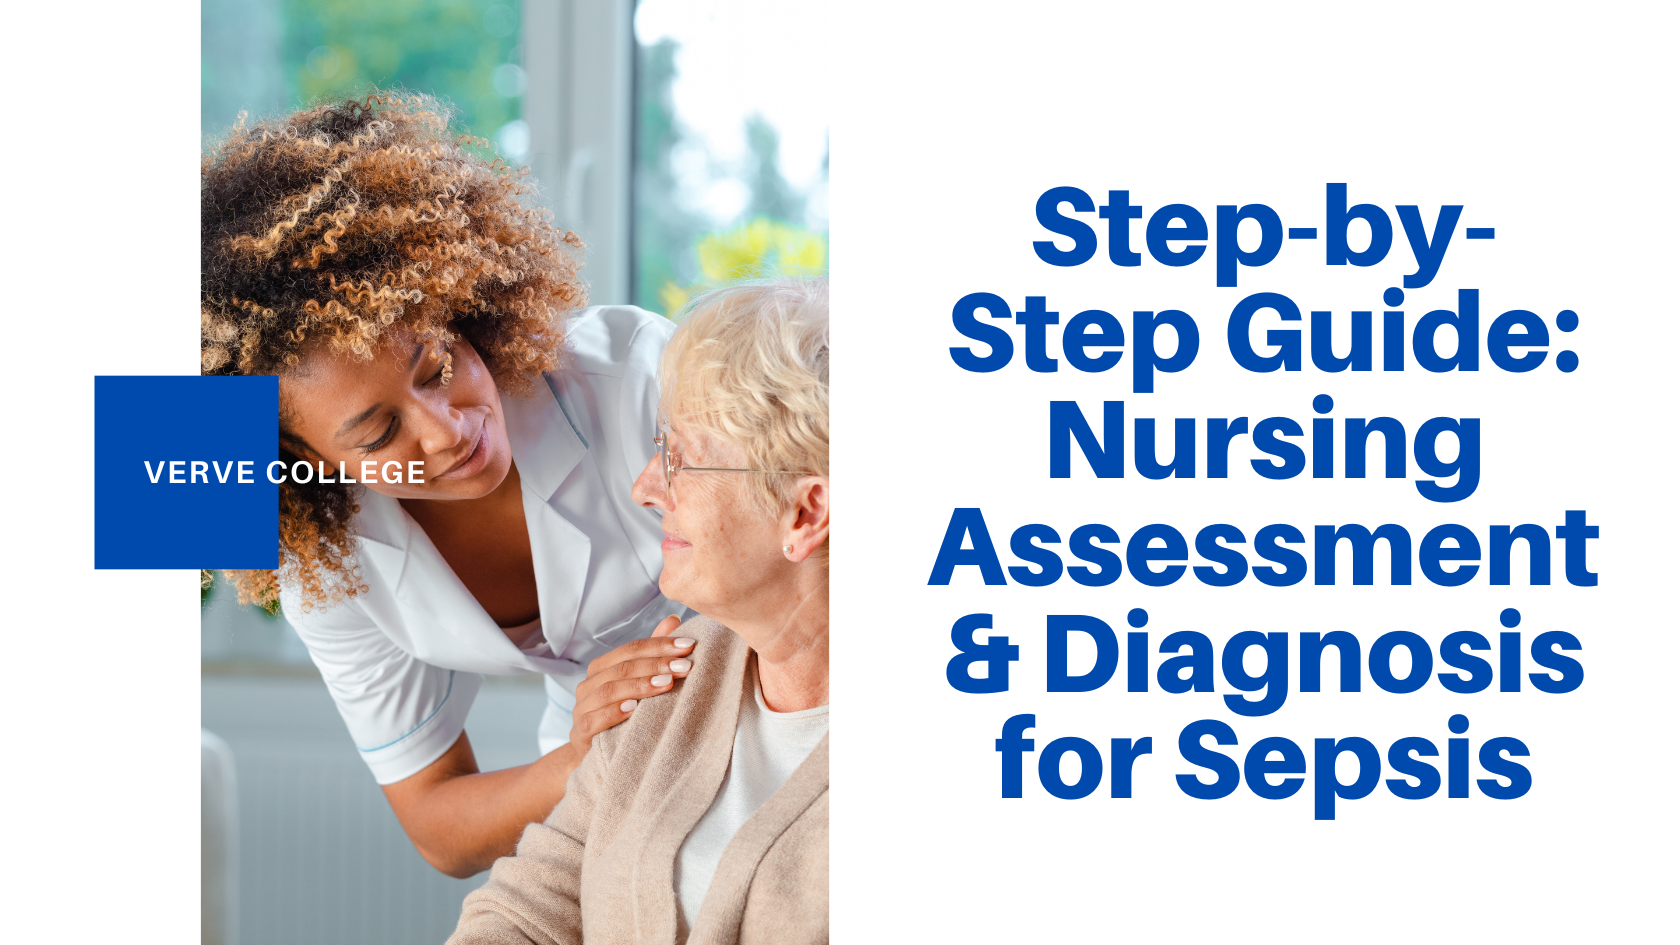 Step-by-Step Guide: Nursing Assessment & Diagnosis for Sepsis